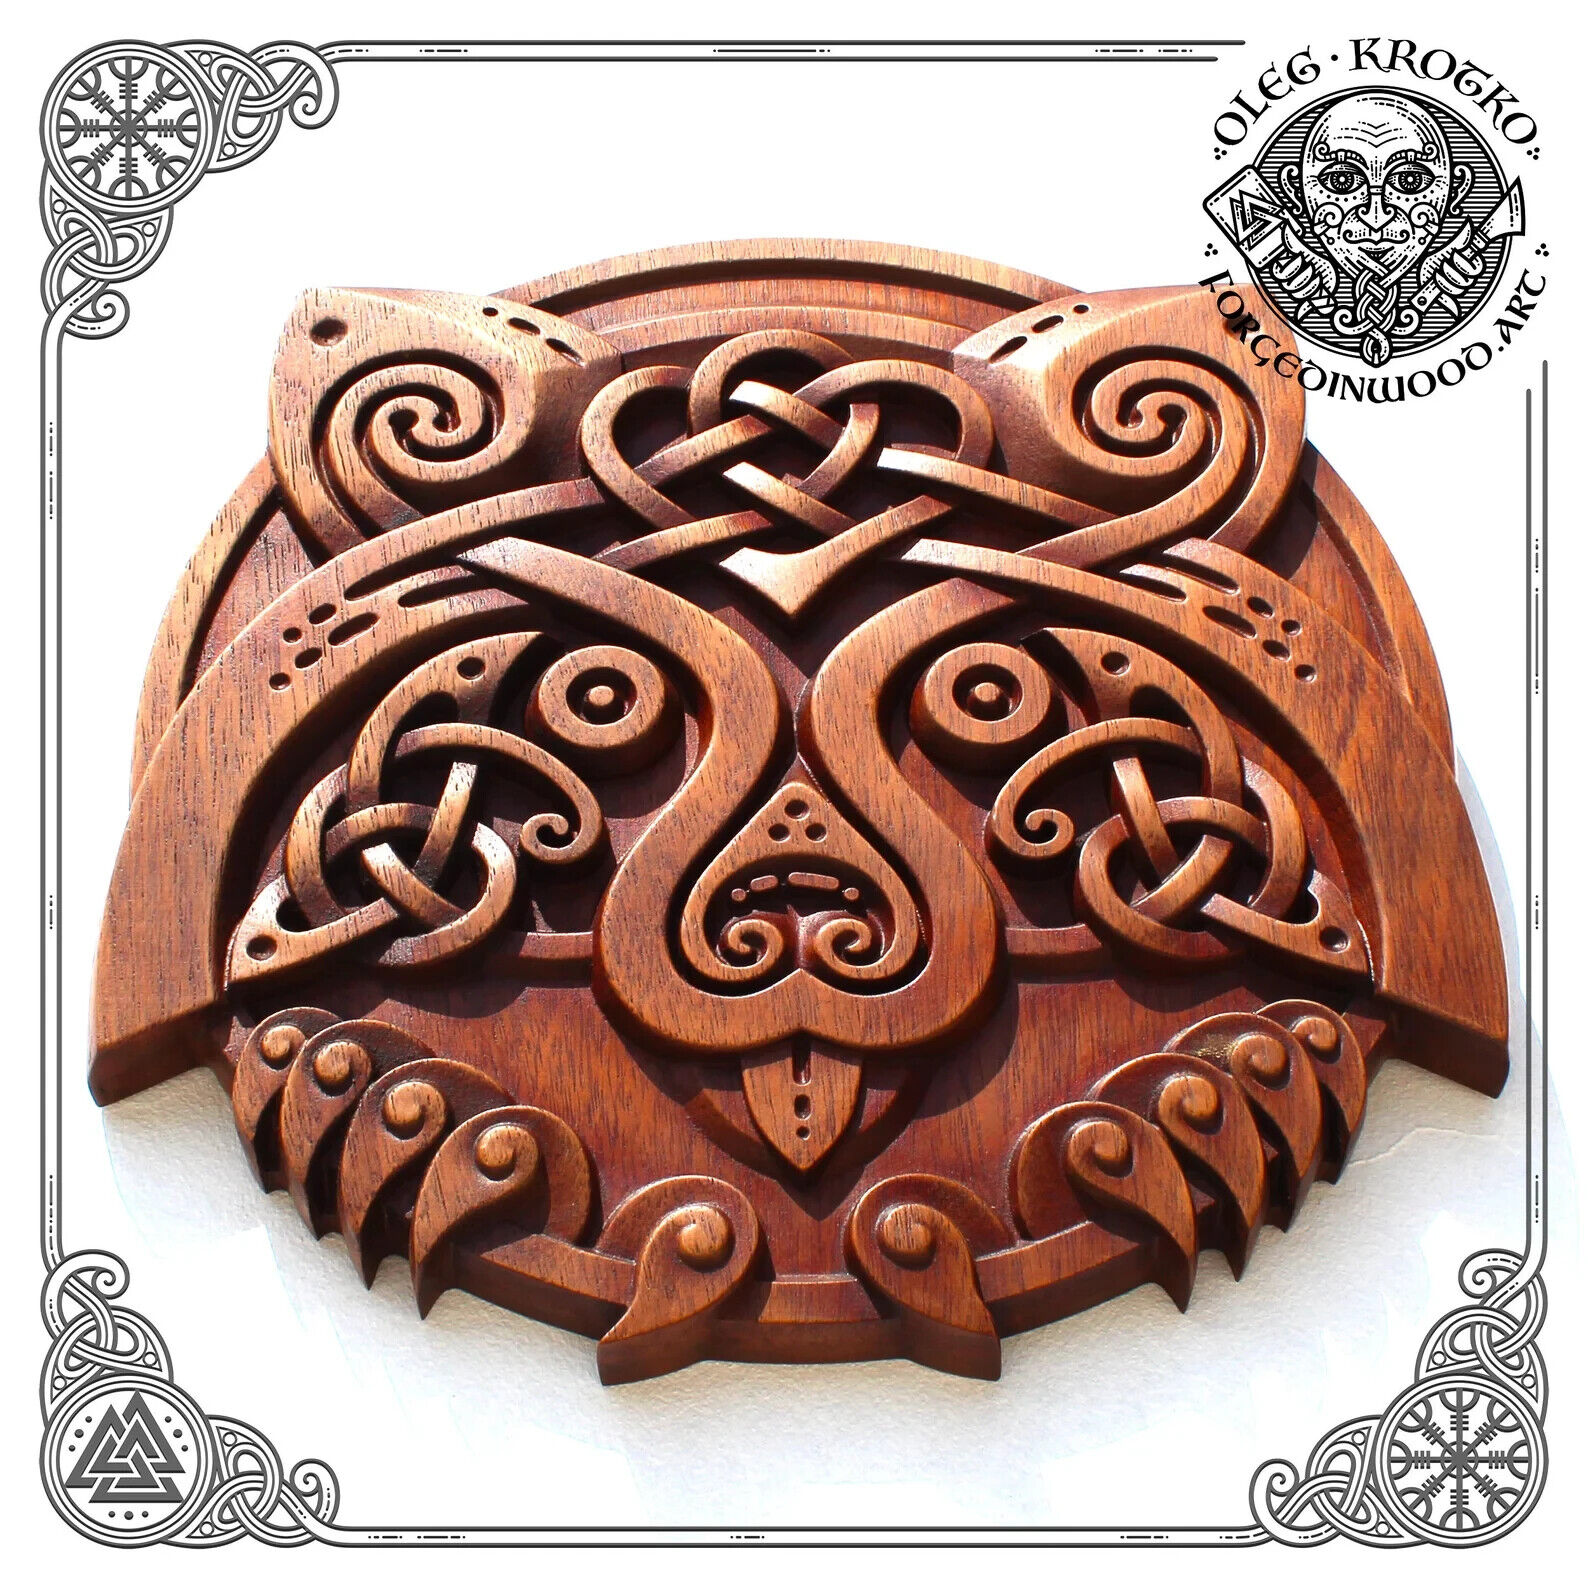 Cute celtic raccoon wood carved plaque, Celtic knotwork animal design Norse Wall